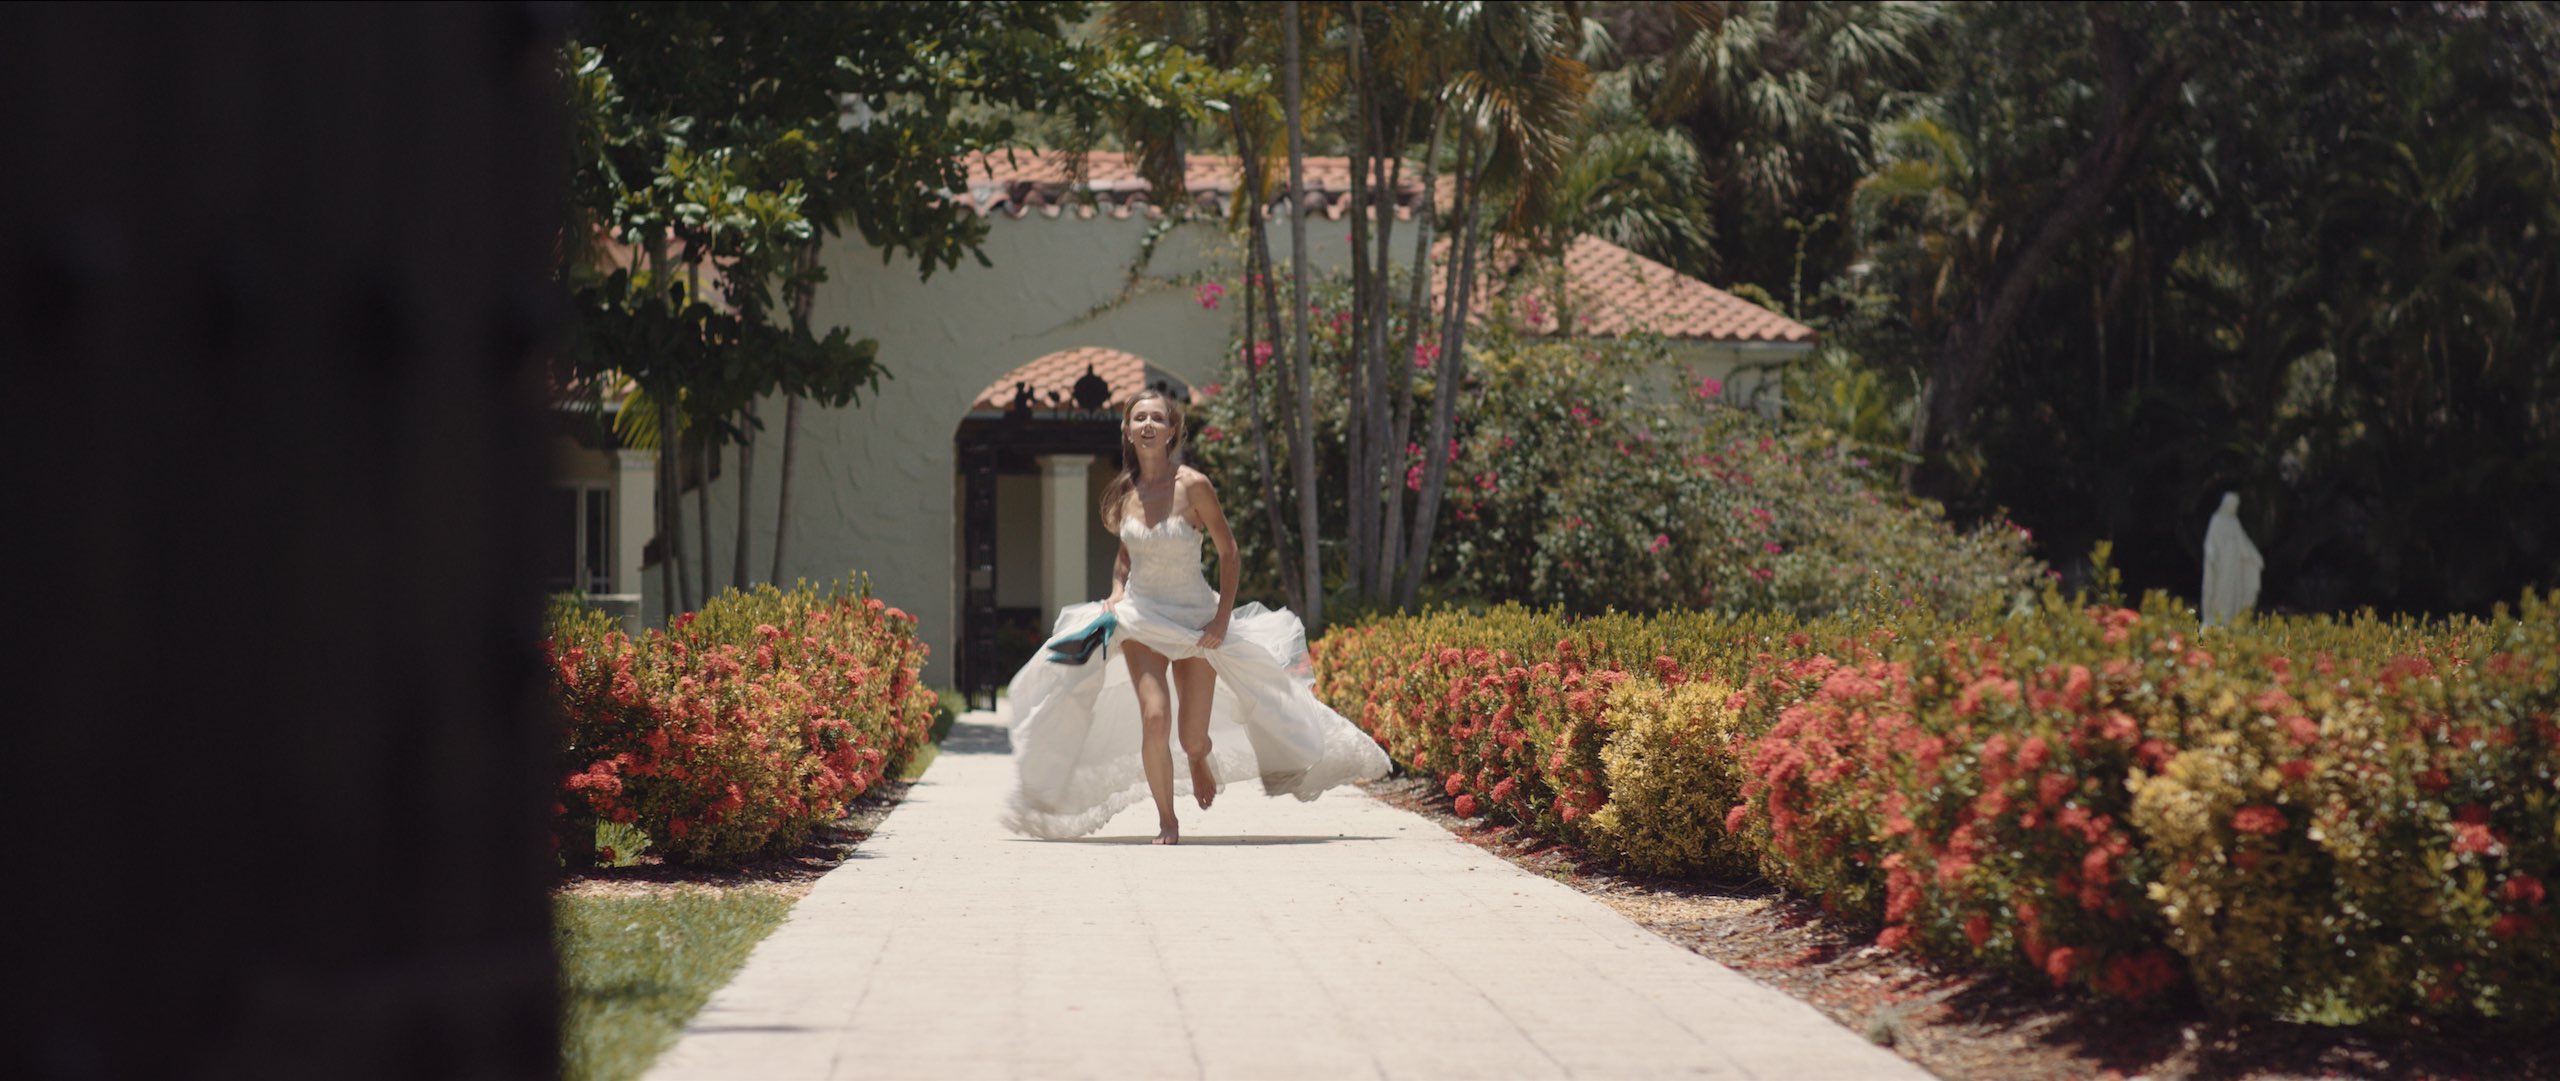 Dailies 0059 Delilah Castro Wedding Dresses Woman with long blond hair in white dress running down walkway holding her heels and hitching her dress up